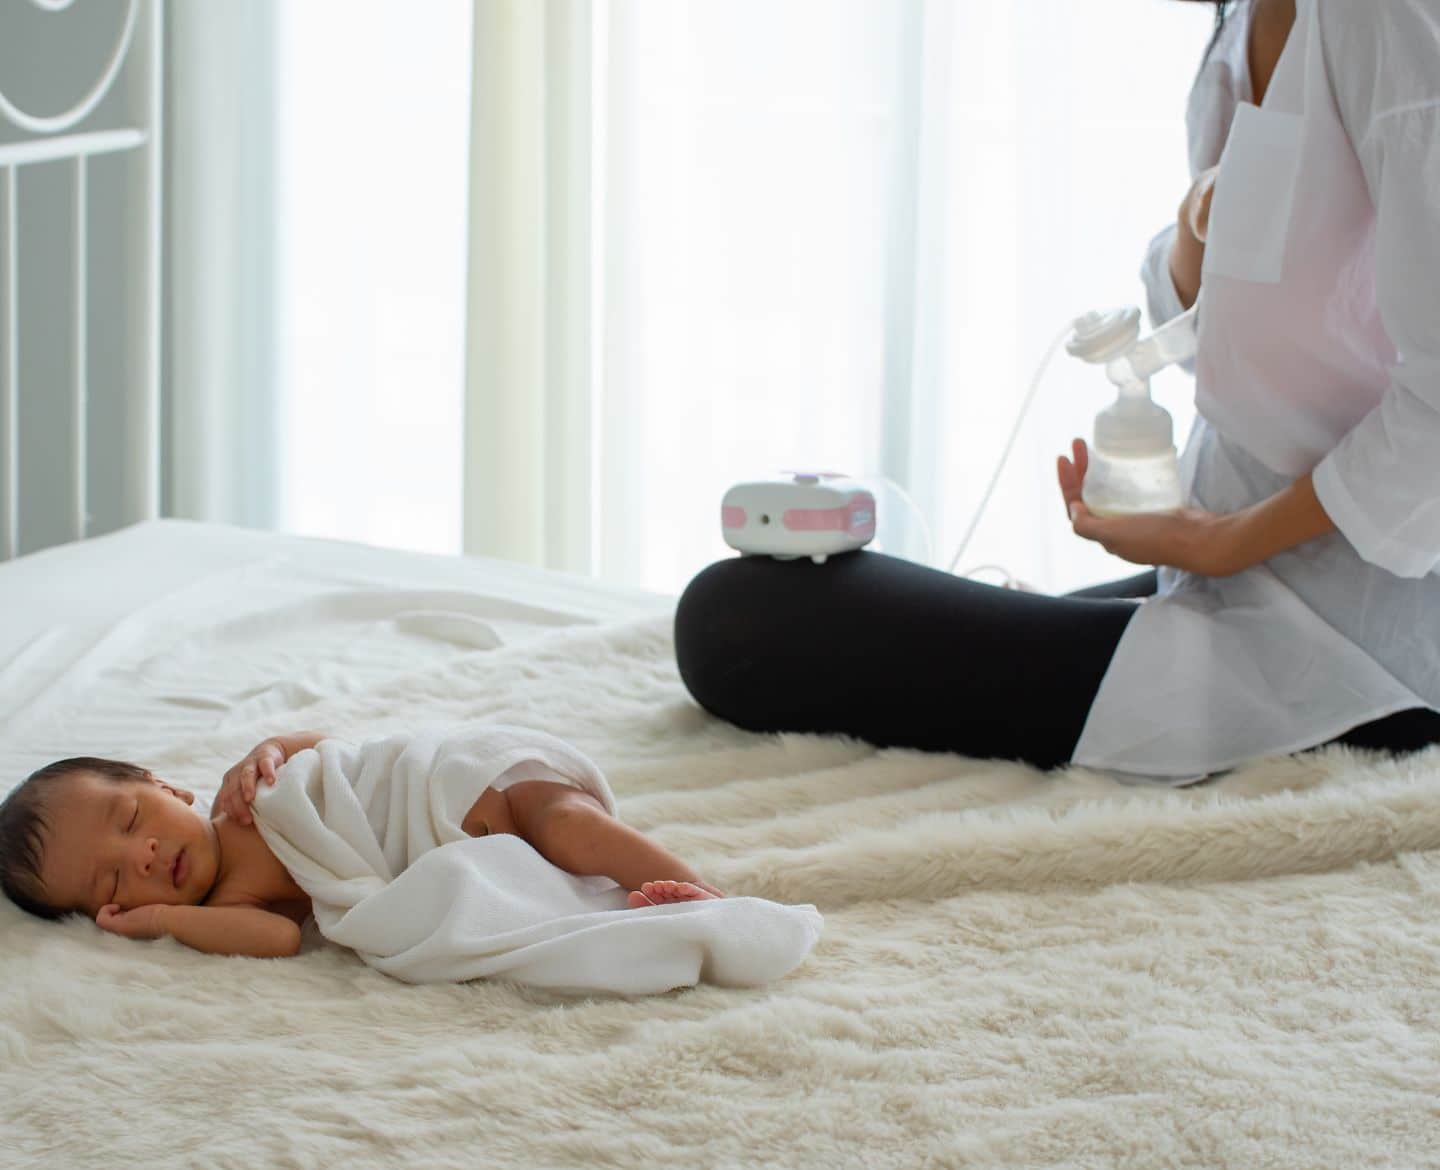 mom exclusively pumping while baby lays on bed